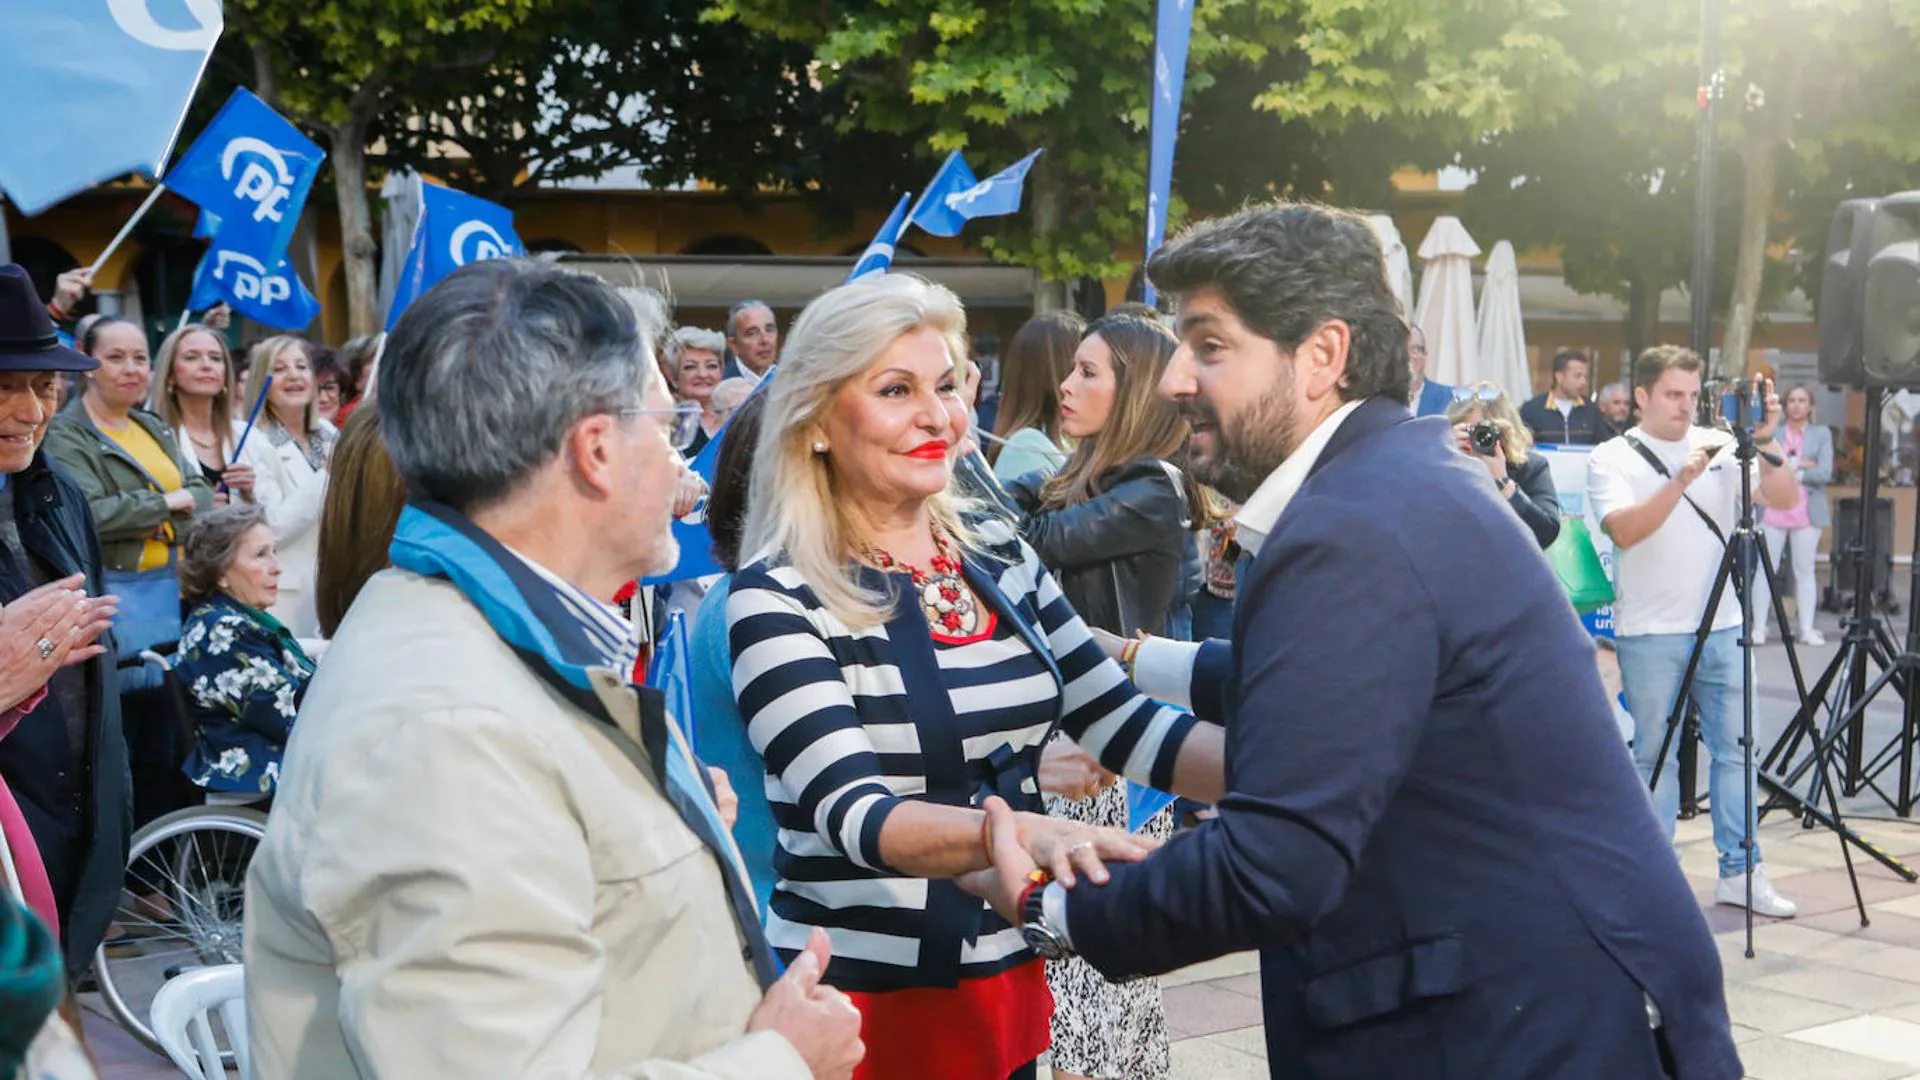 López Miras insists that the left can govern if the PP does not have a majority